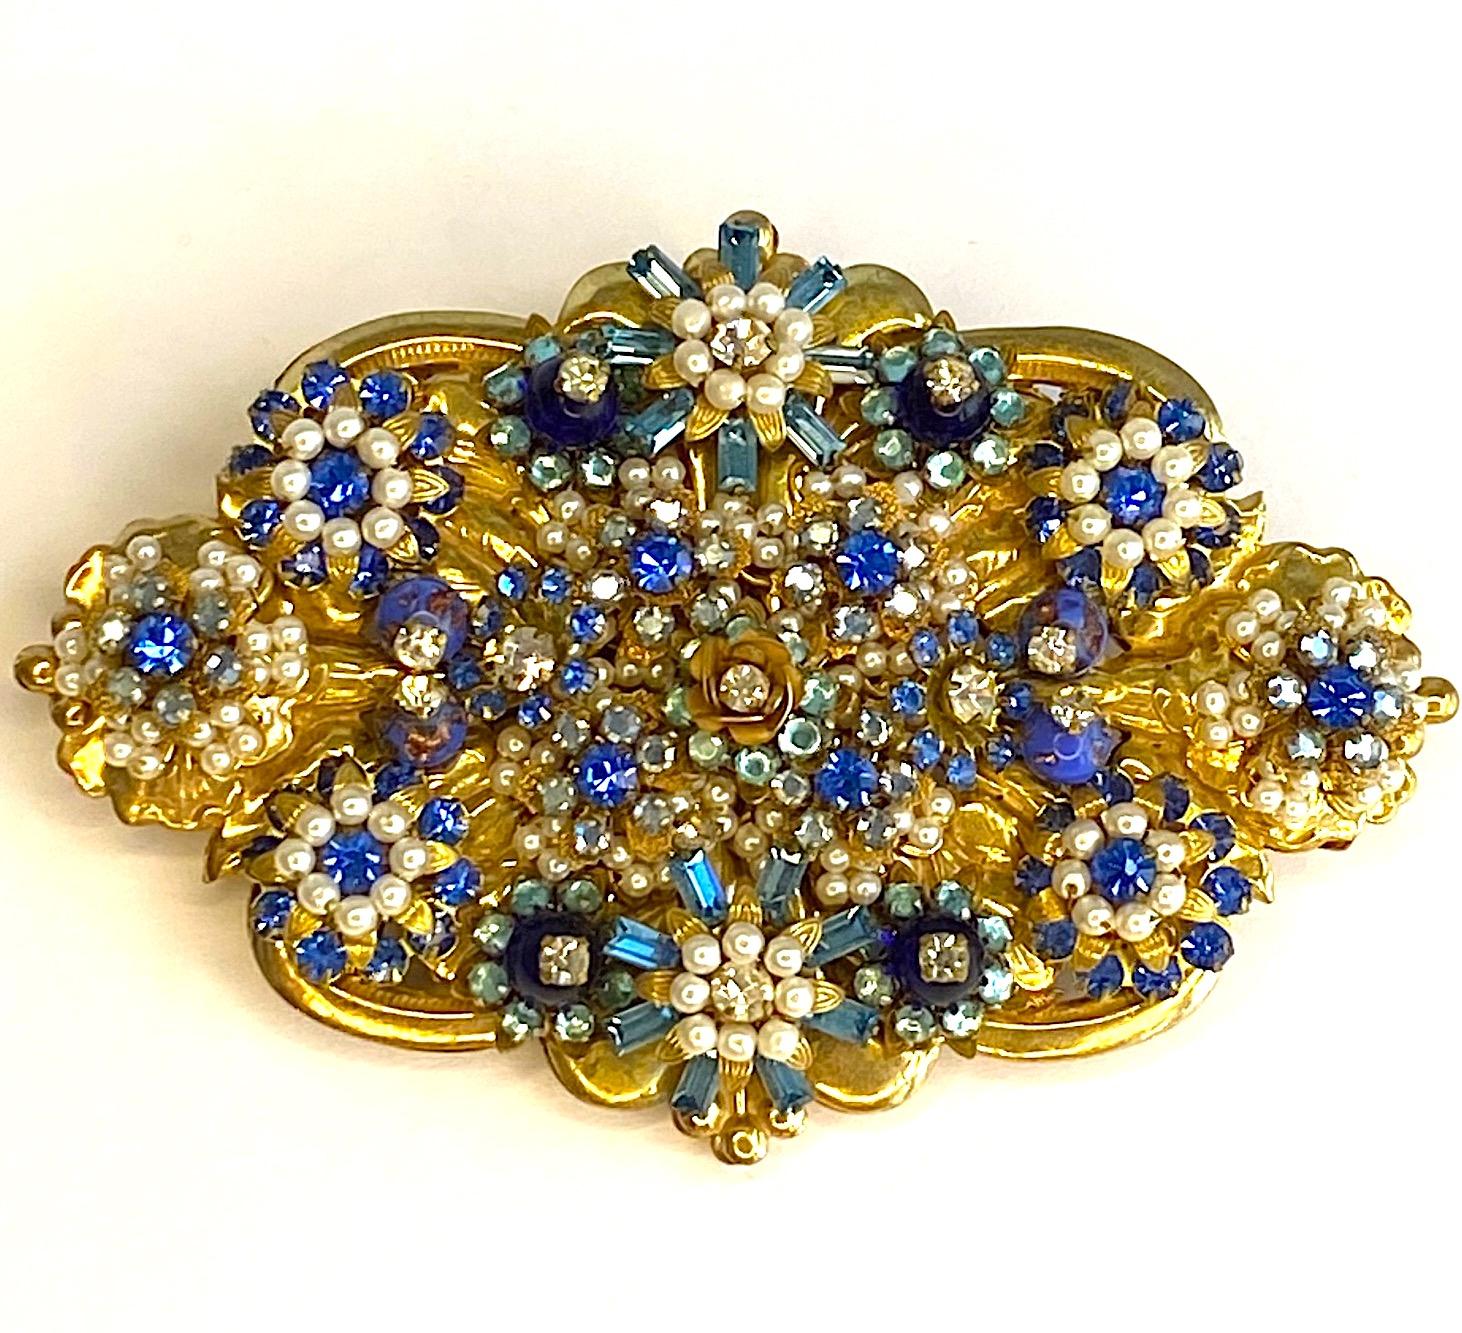 A stunning example of the artistry of designer Stanley Hagler. Small faux seed pearl beads, aqua and royal blue rhinestones, navy blue beads and clear rhinestones are carefully wired in a floral pattern onto a horizontal plate. This plate is pierced